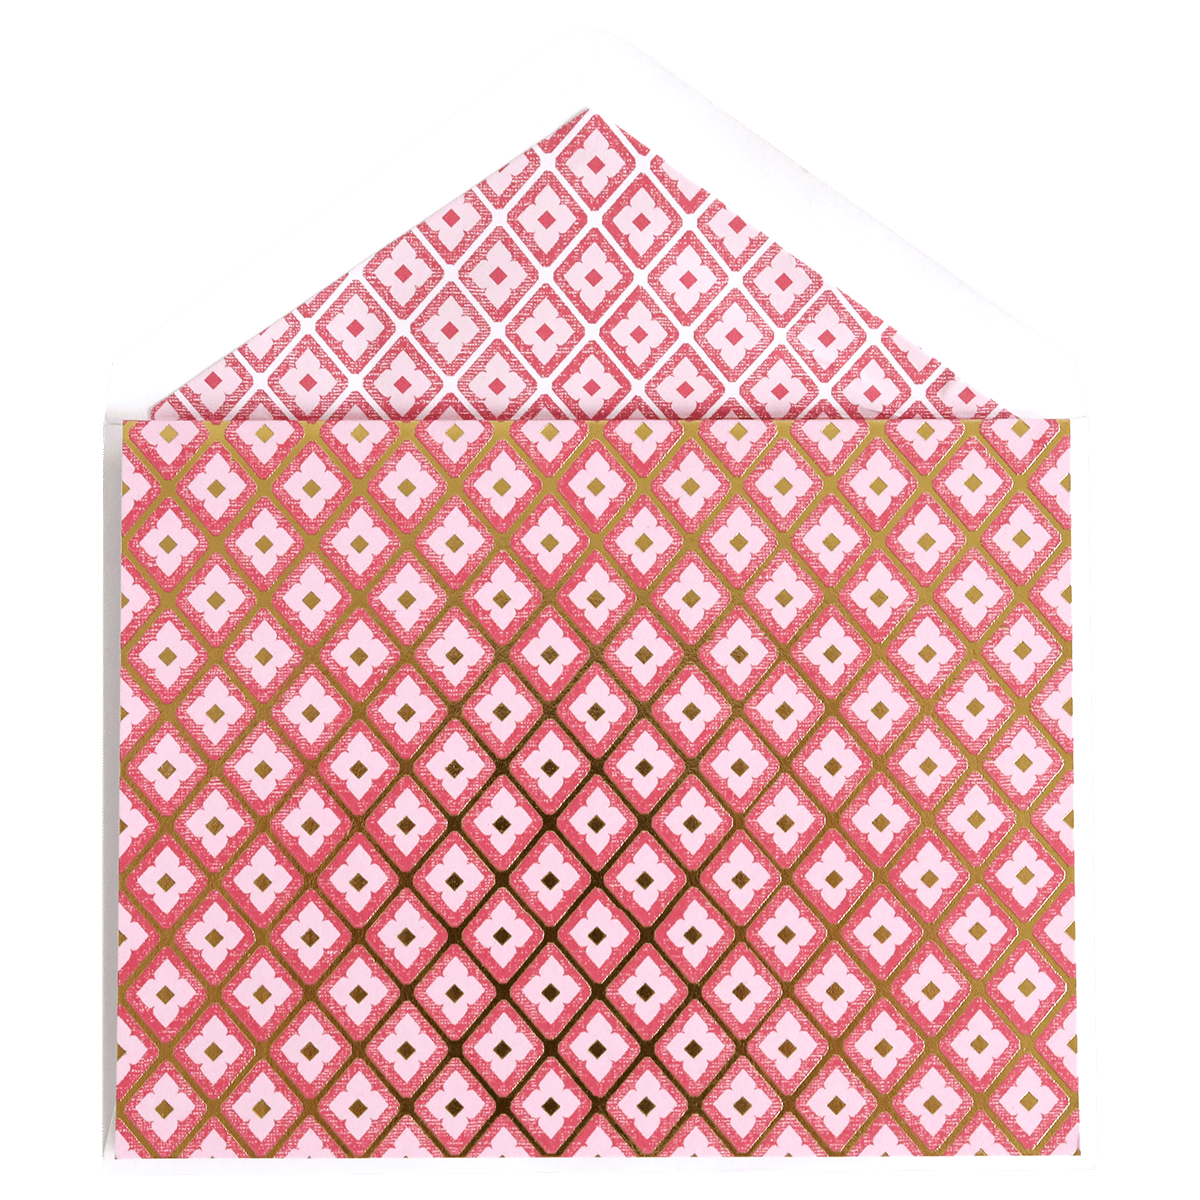 a pink and white envelope with a diamond pattern.